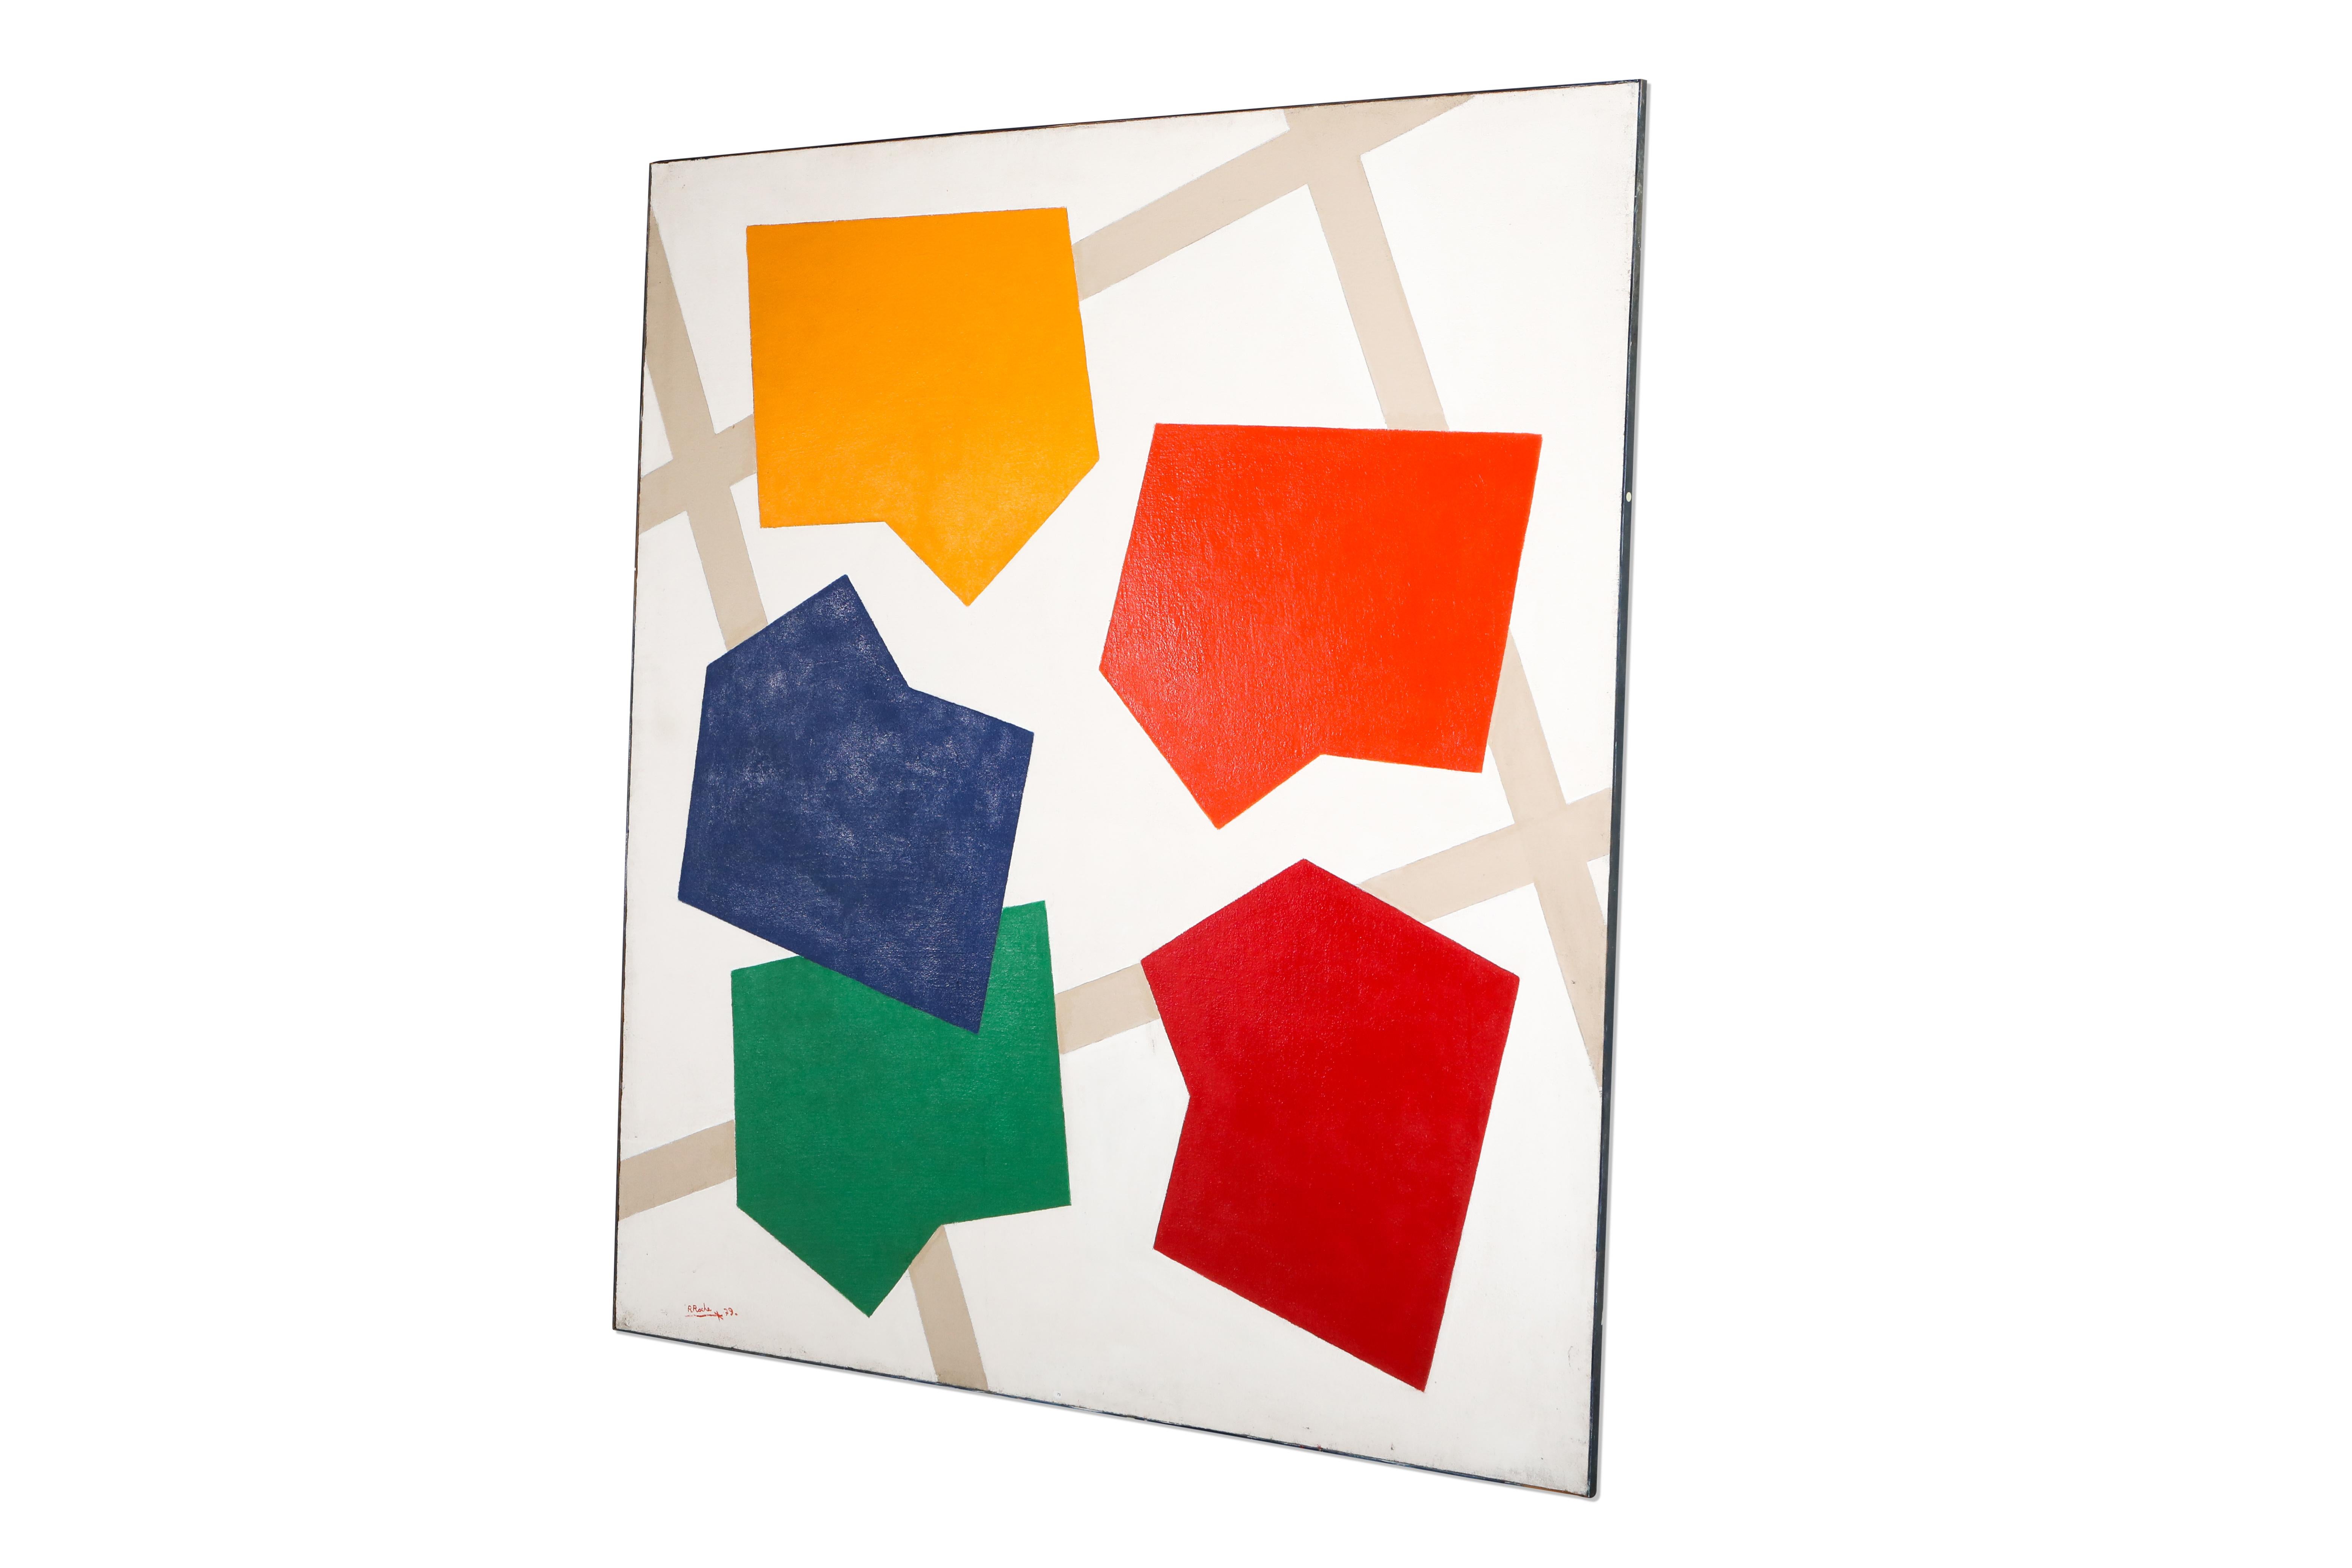 Painting by René Roche; 1979; Contemporary painting; post-war artwork; Graphic artwork.
Exhibited in the exhibition 'Espace et abstraction' in Palais Saint-Jean in Lyon, France in 1979.

René Roche was born in Vienne, France, in 1932. He followed